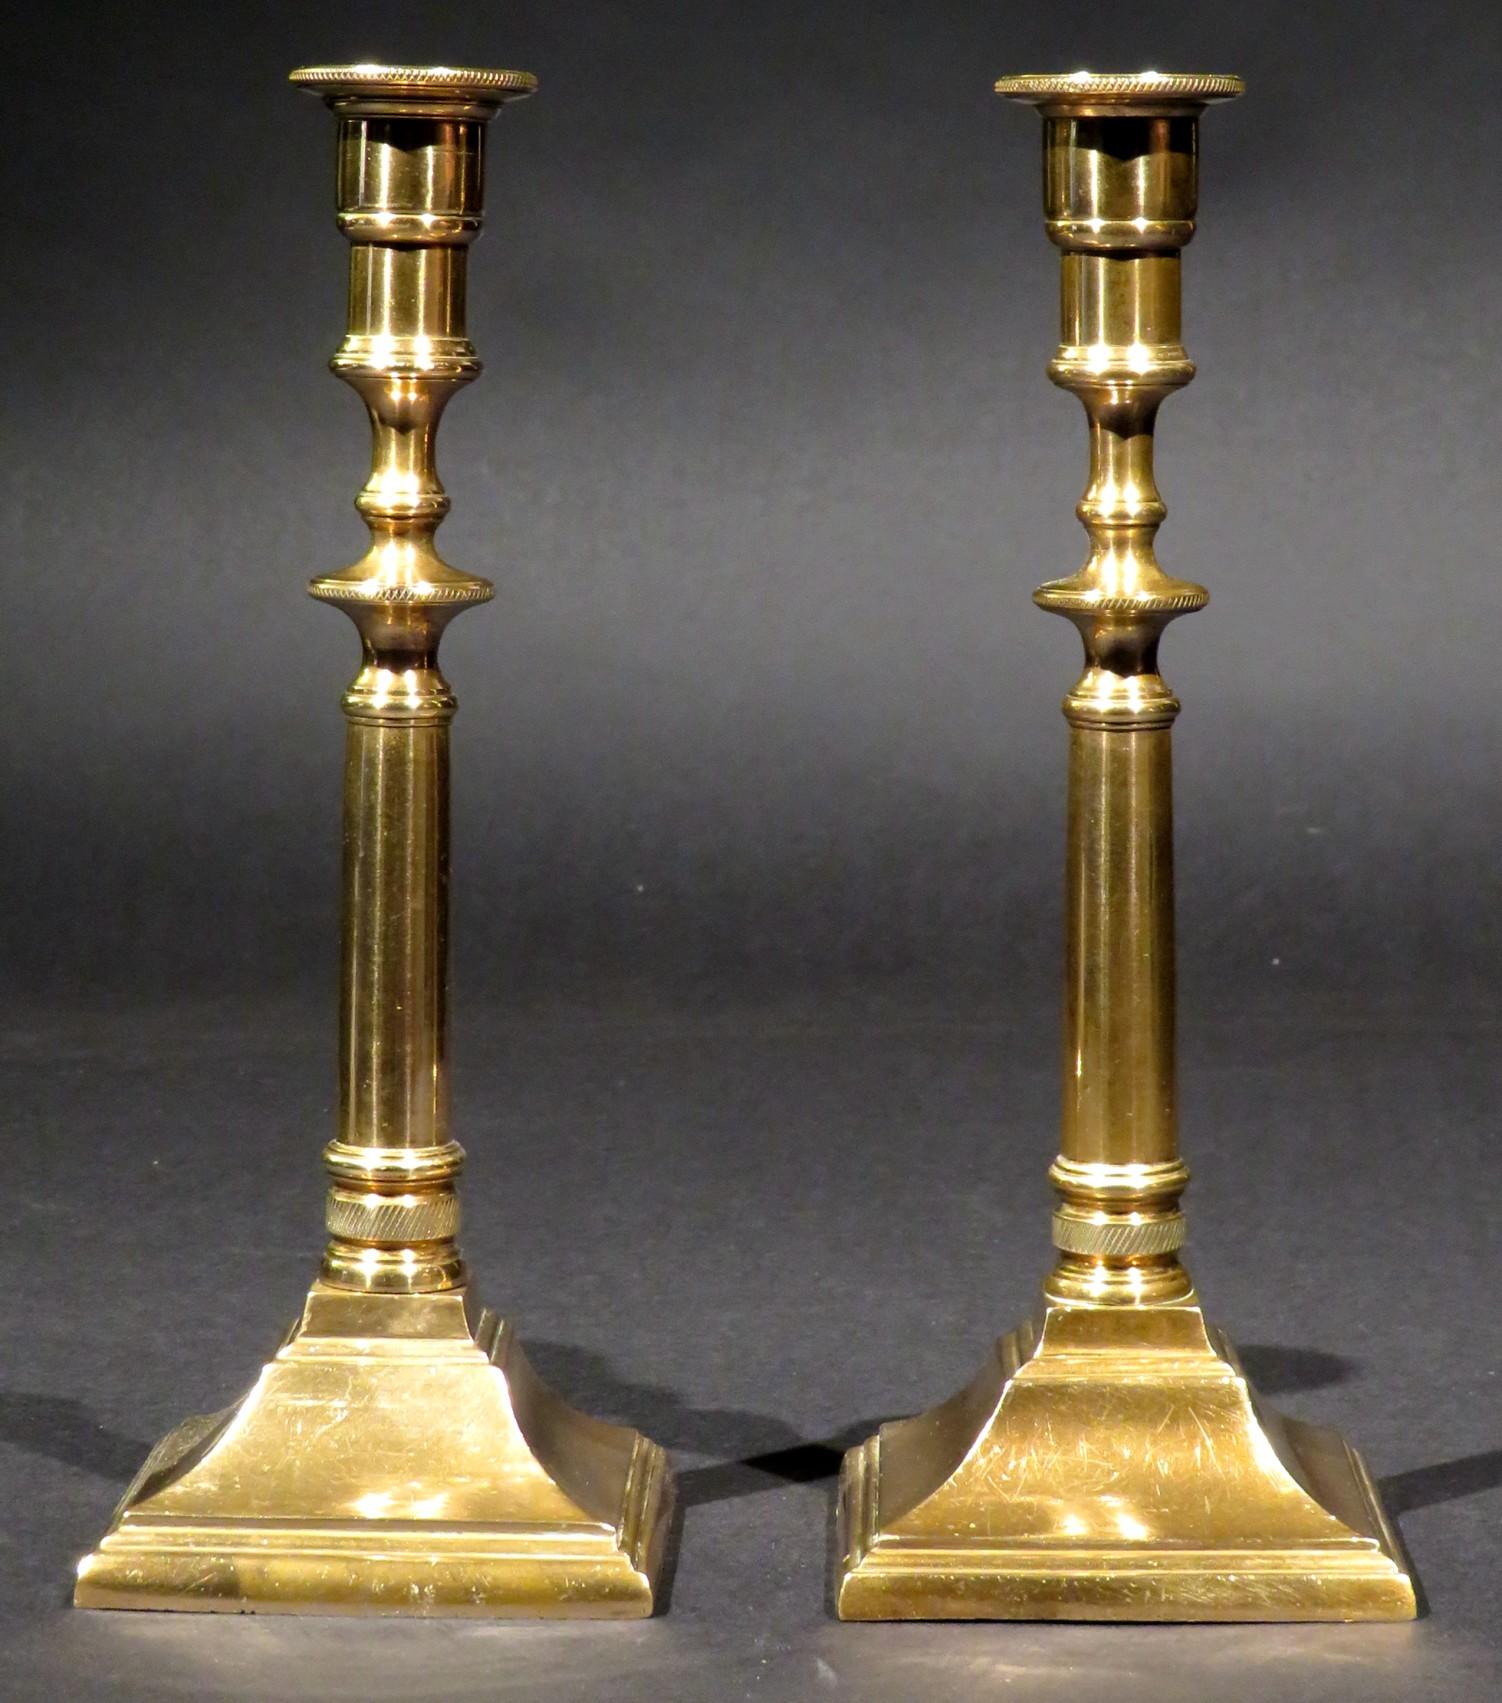 A very handsome & relatively rare pair of 18th century Georgian cast 'bell metal' campaign candlesticks. Both having exceptionally heavy, solid cast columns terminating to threaded posts that allow them to disassemble for ease of use while in